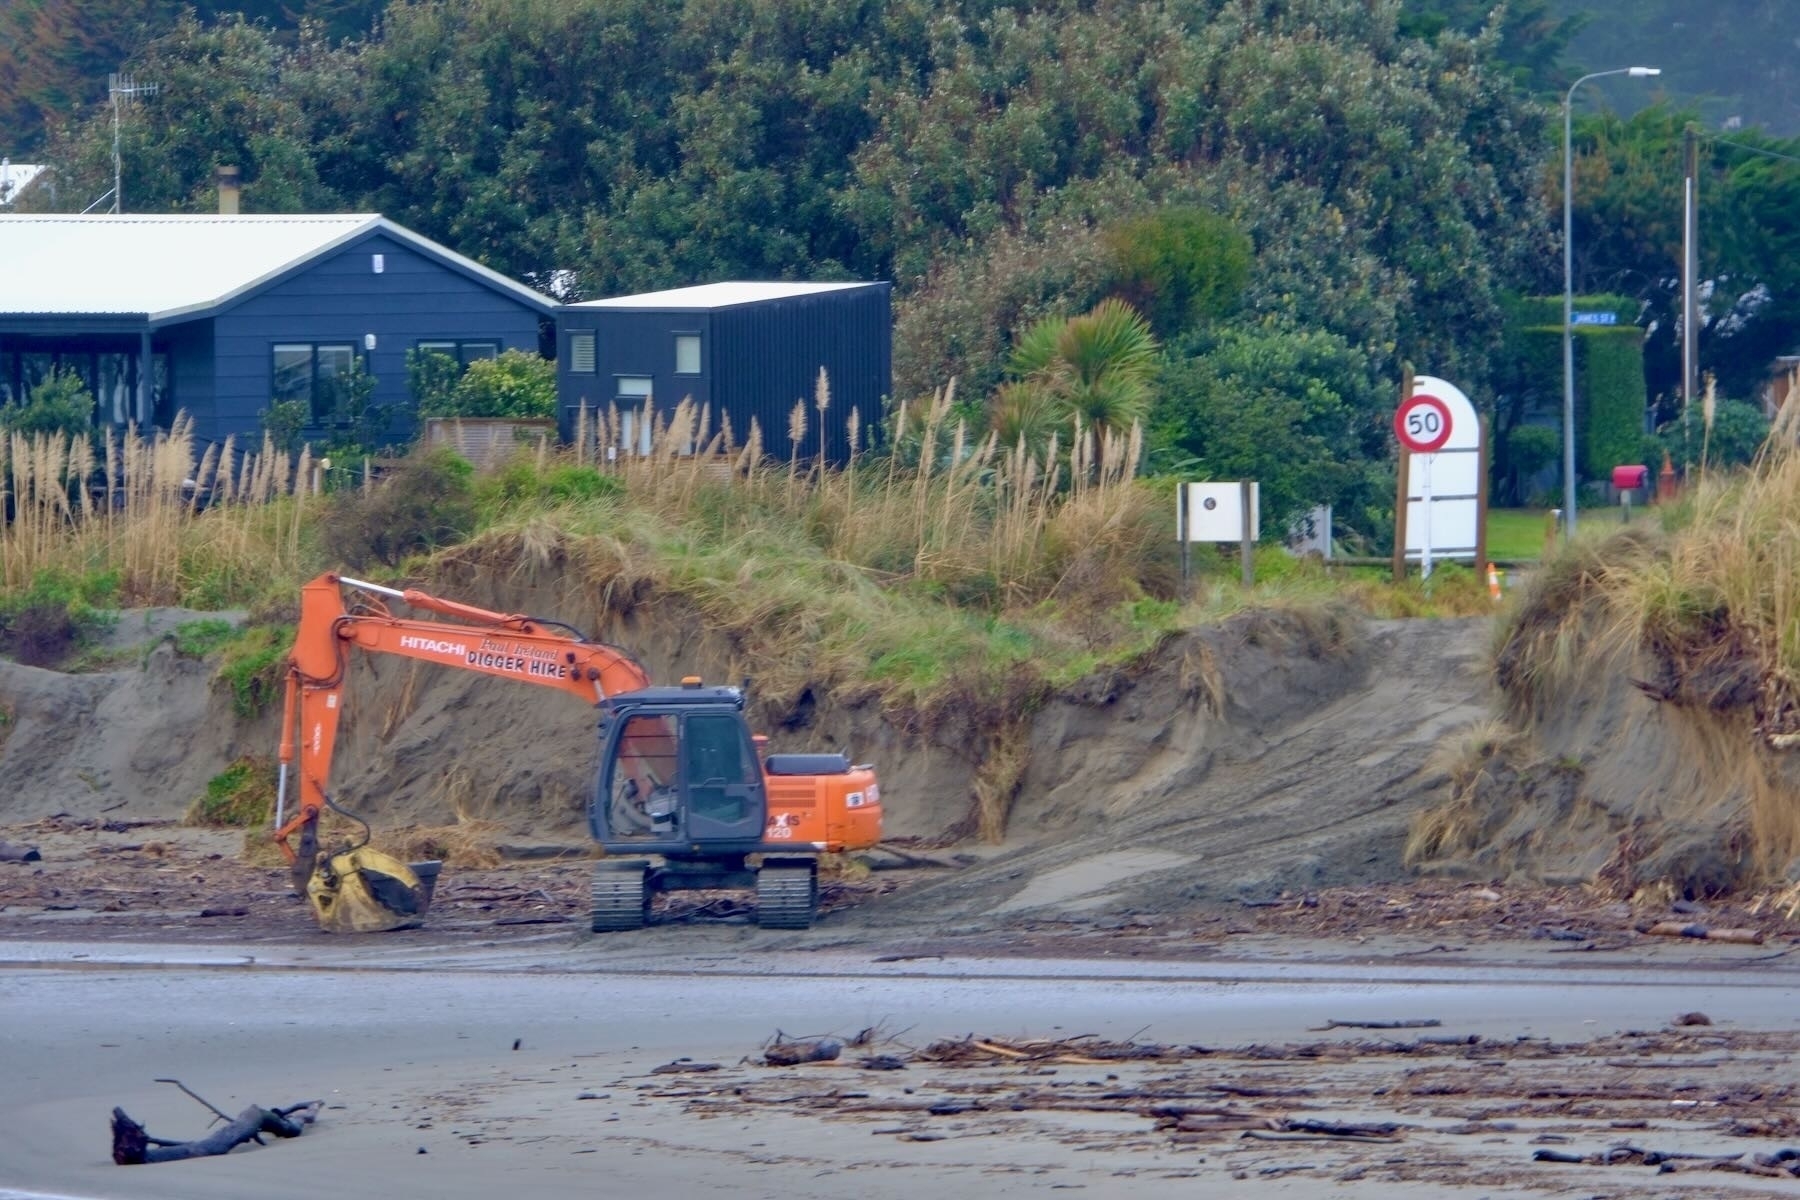 Digger on the beach in front of the track through Miratana land. 